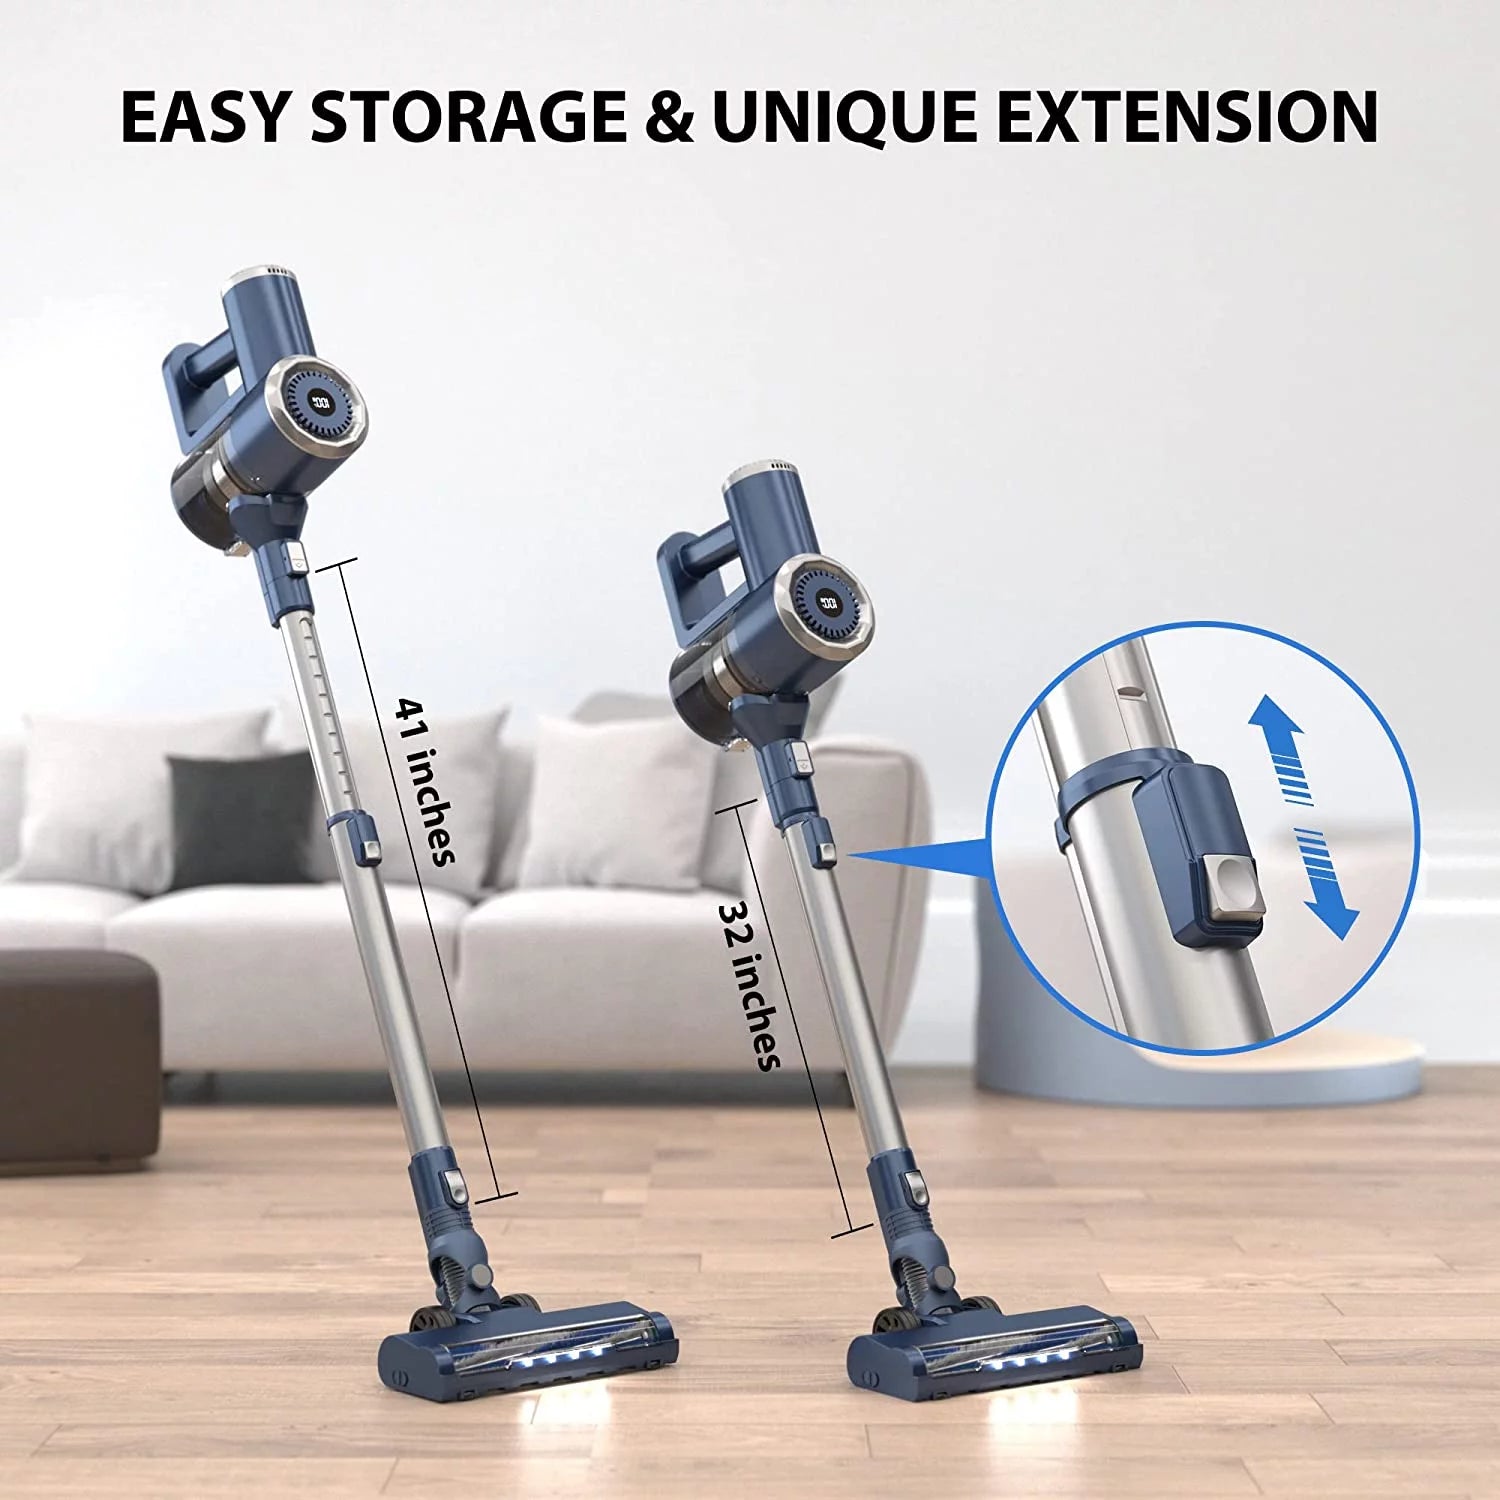 Cordless Stick Vacuum Cleaner Lightweight for Carpet, Floor, Pet Hair and More - Includes 2 Tools